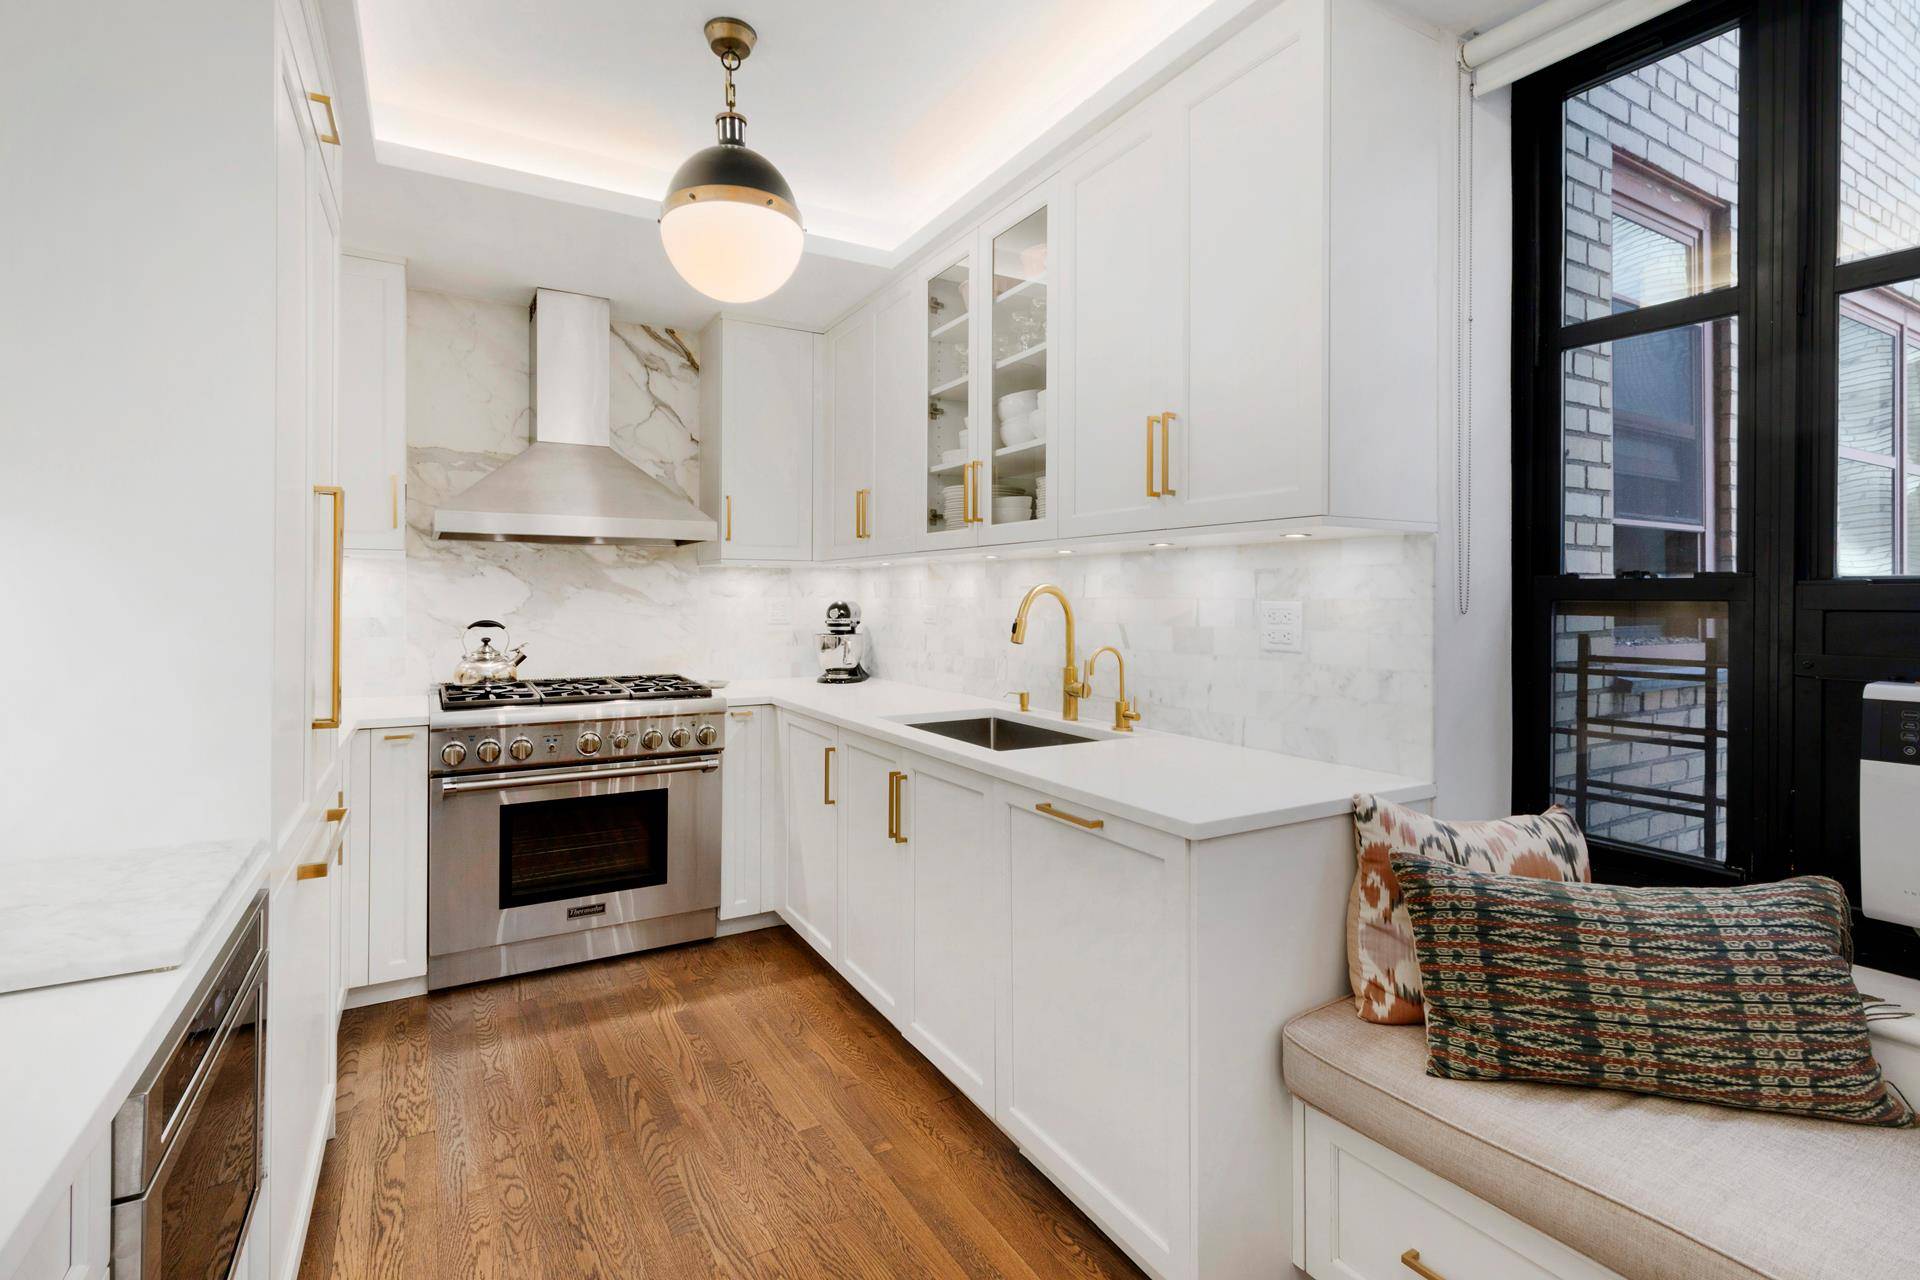 Welcome home to your completely gut renovated 3 bedroom could be 4 see alternate floor plan 2 bathroom apartment in the Gramercy House, a gorgeous Art Deco building in the ...